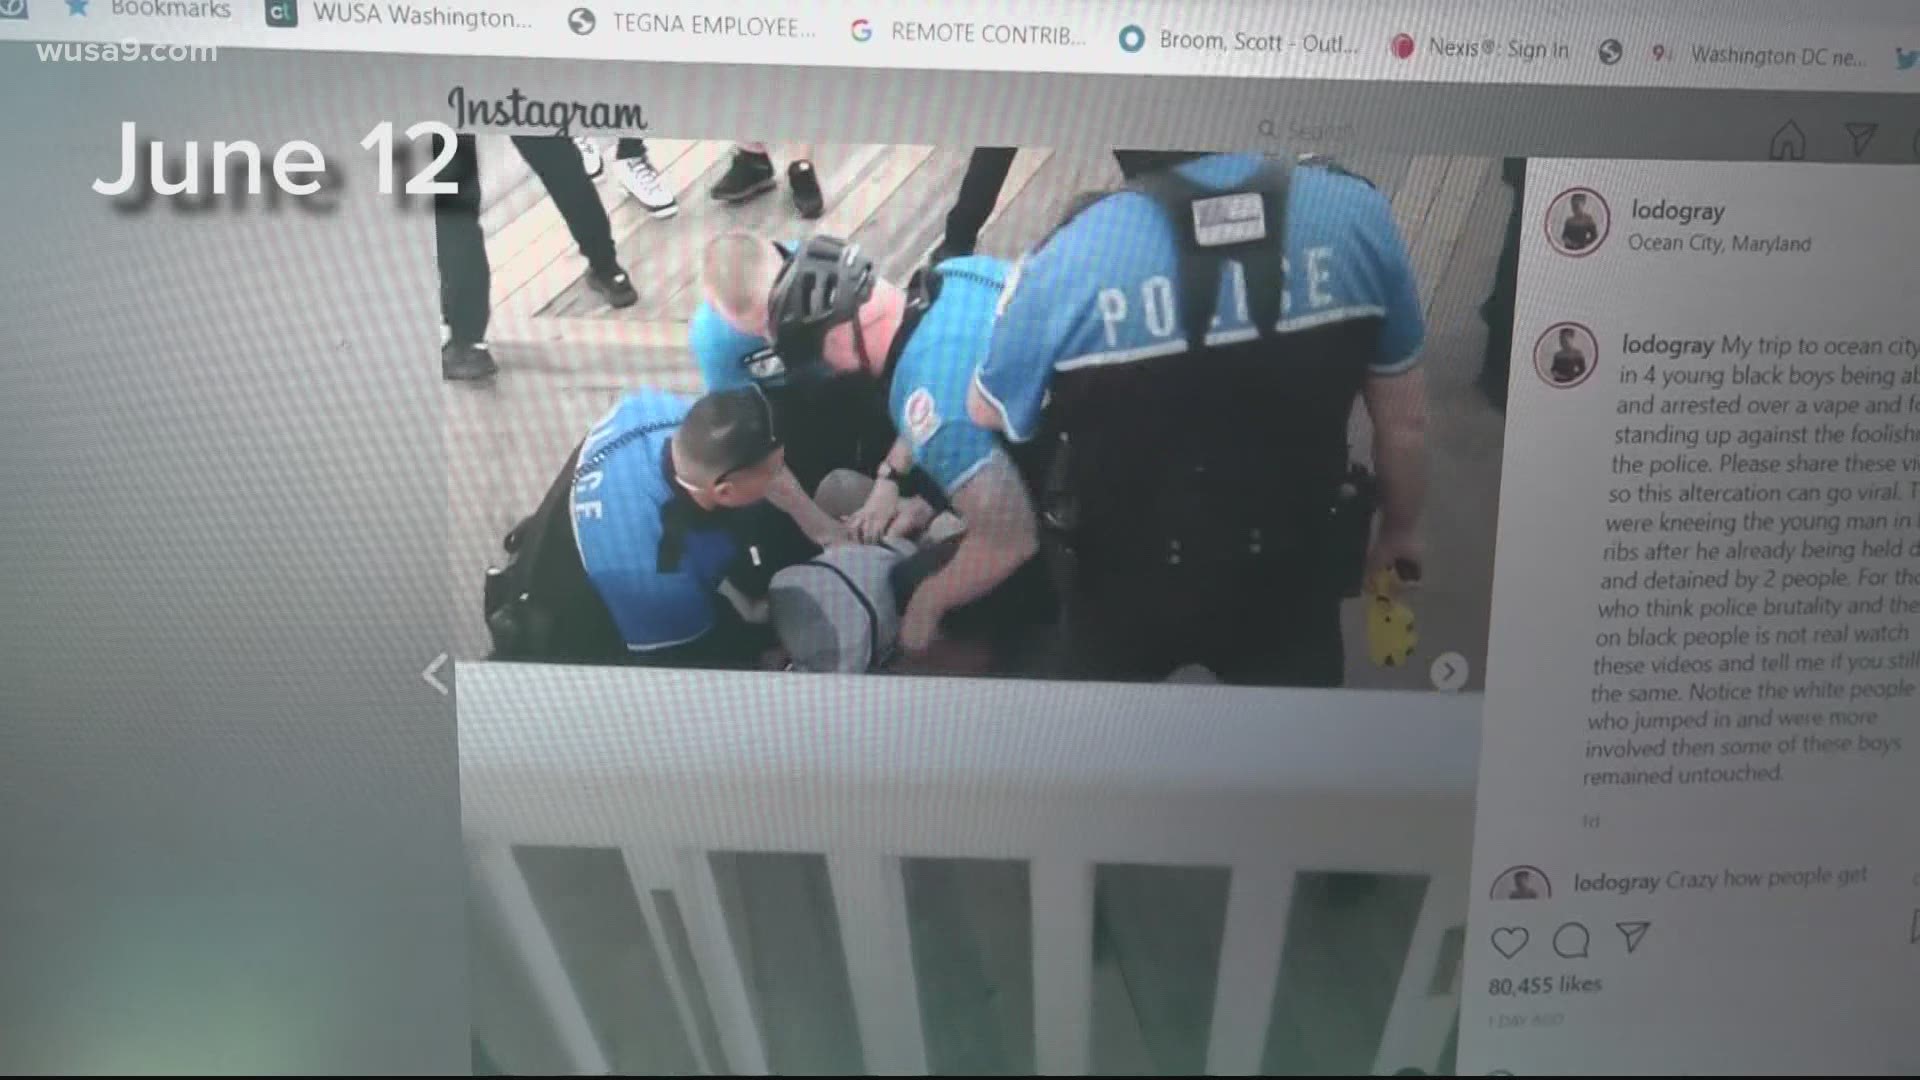 Ocean City Police say the use of force seen during the arrests over the weekend is being reviewed internally.